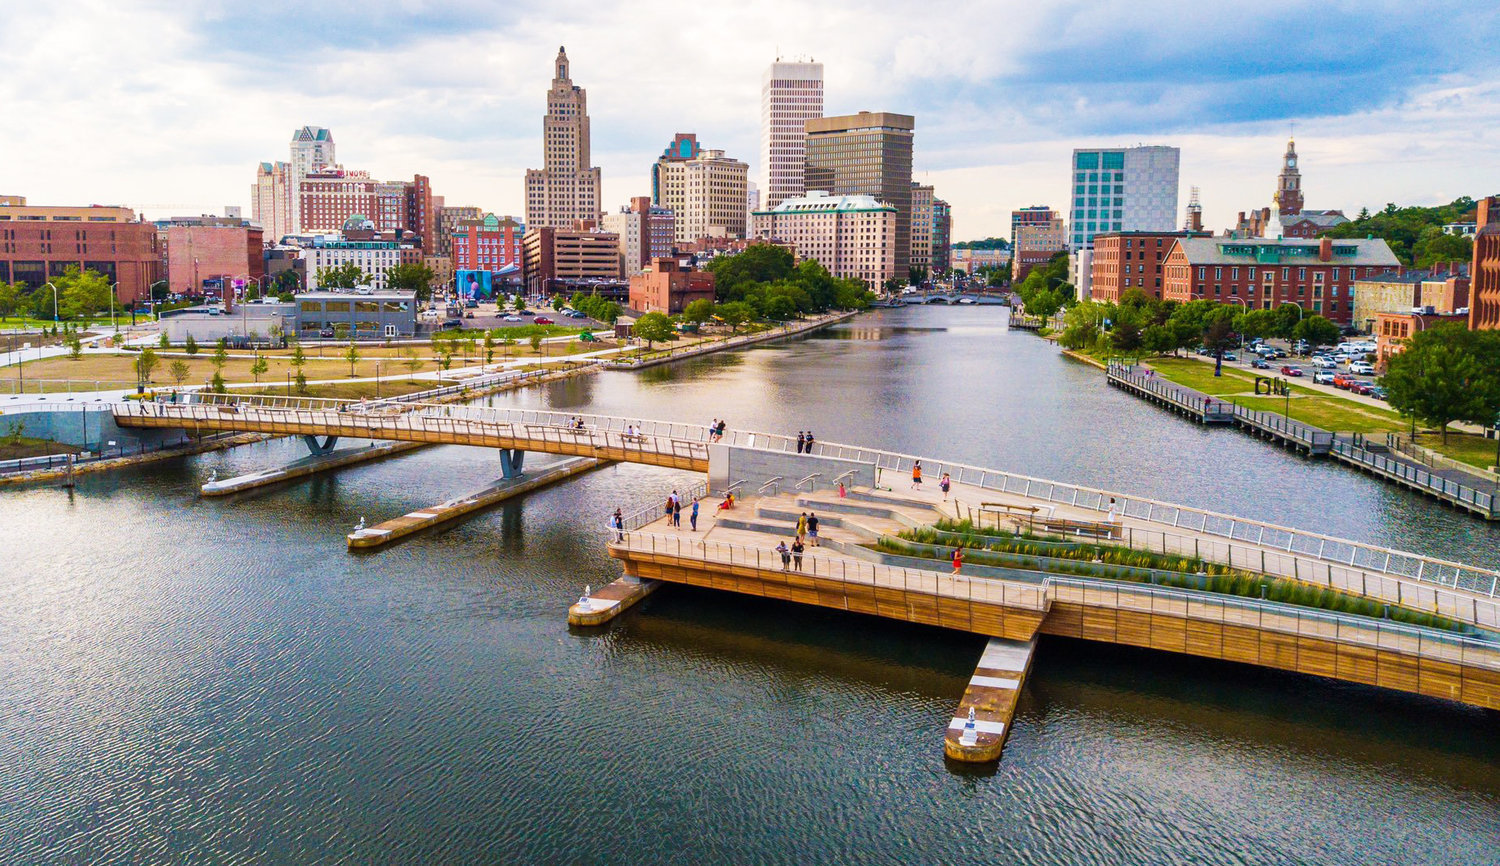 The view of downtown Providence skyline, including the new pedestrian bridge. Where does housing, children's health and health equity fit into the picture?